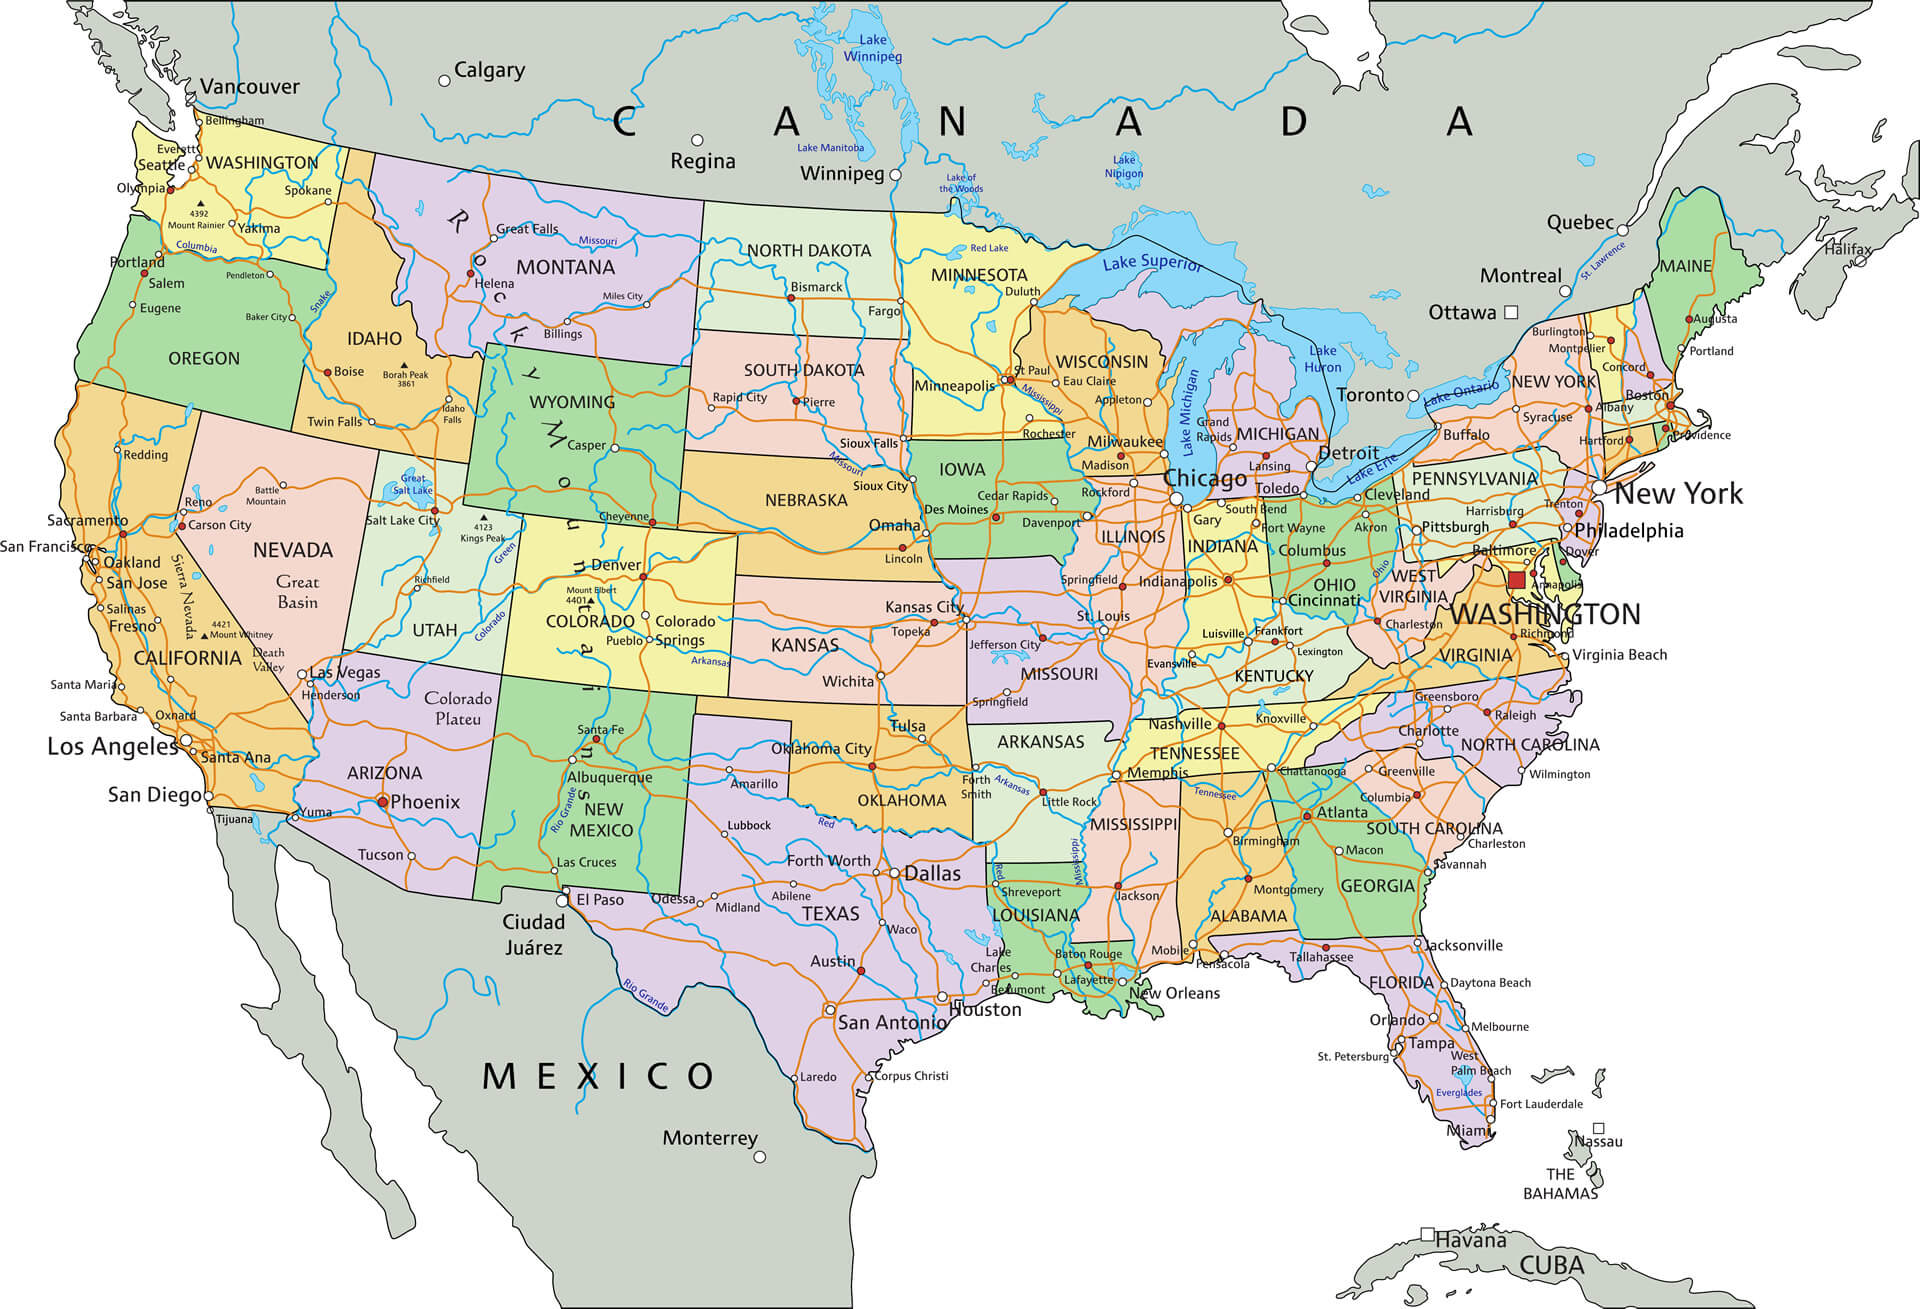 United States of America Highly Detailed Editable Political Map